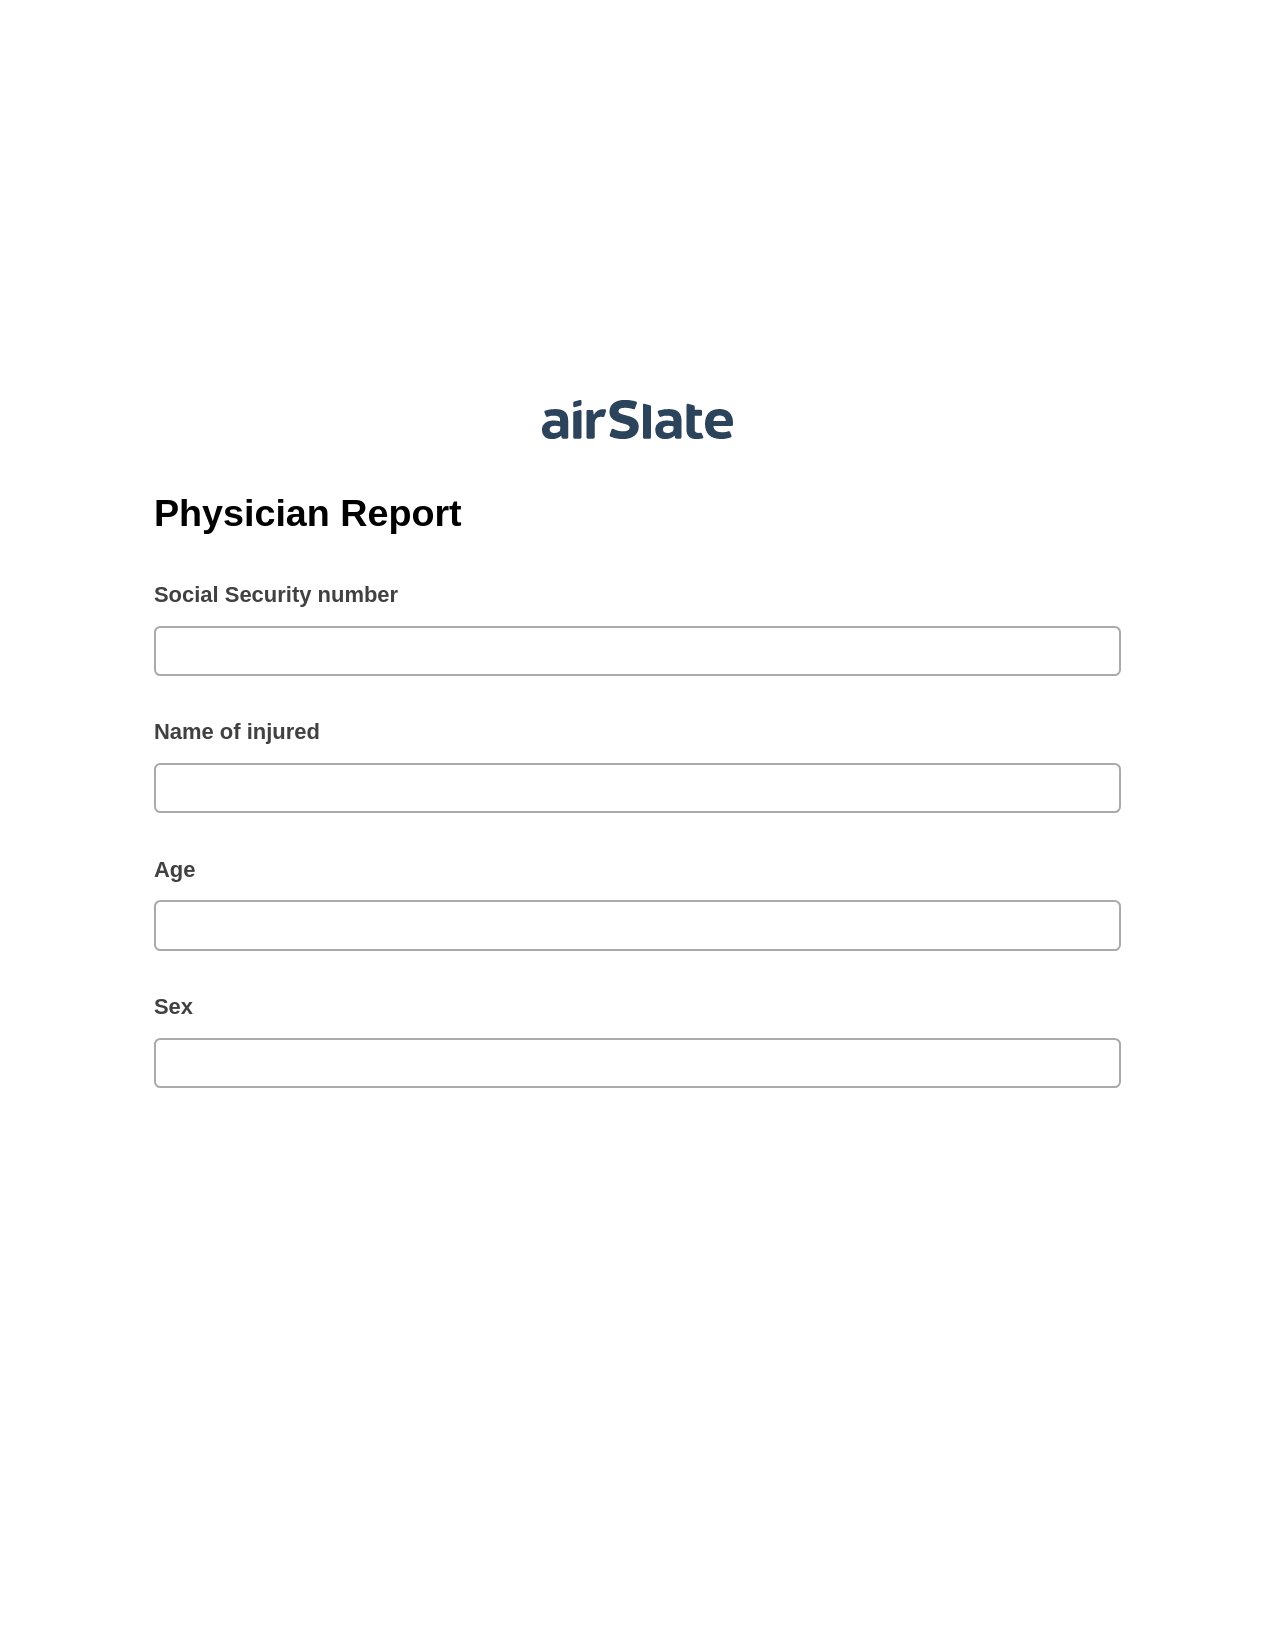 Physician Report Pre-fill from MS Dynamics 365 Records, Create slate addon, Export to Smartsheet